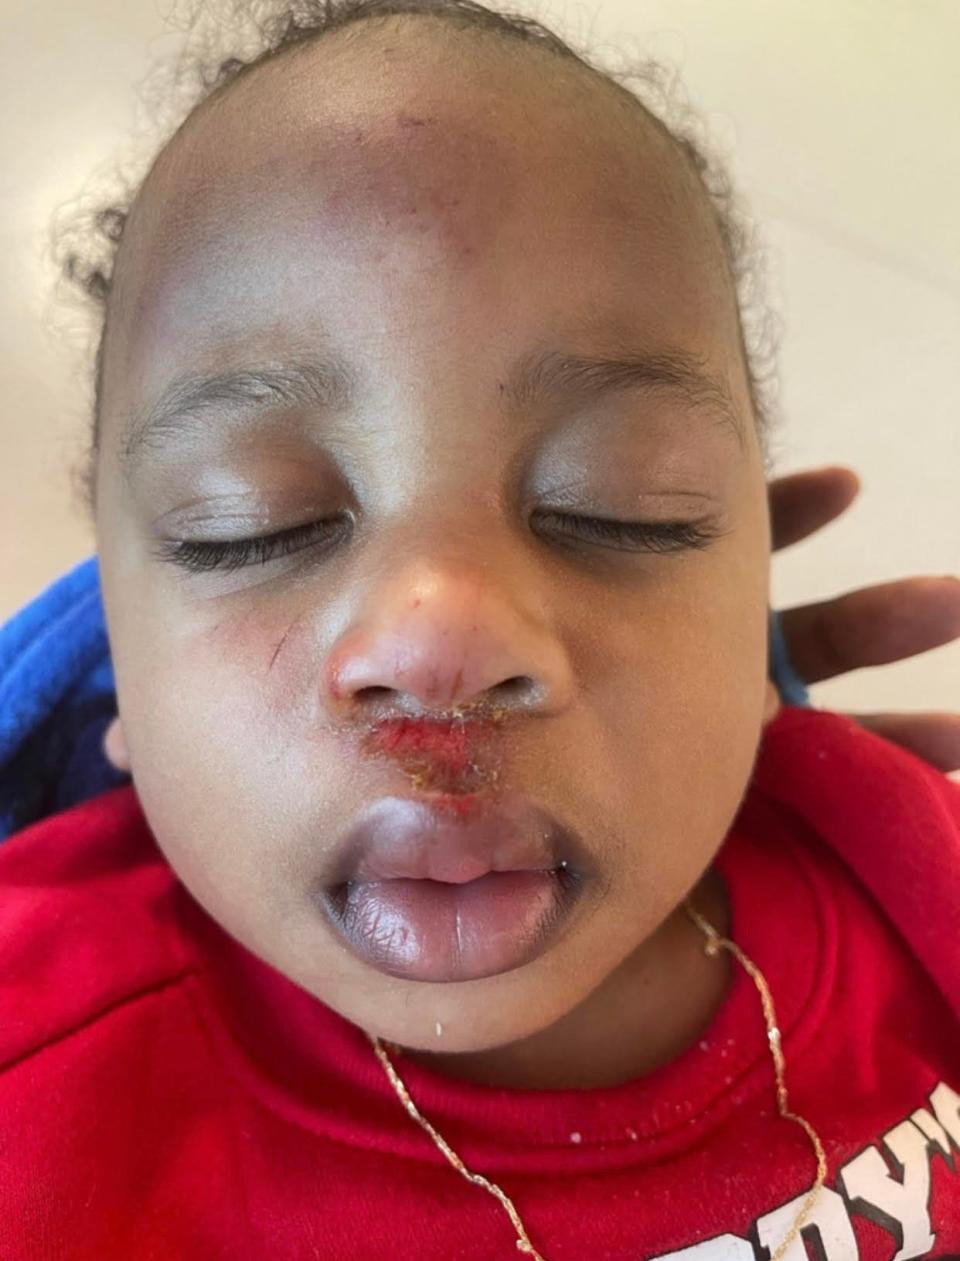 One-year-old Cylen was injured after the Pensacola Police Department's SWAT team raided the home of his father, Corey Marioneaux, on Feb. 3. The child fell headfirst out of the back of a stationary patrol vehicle.